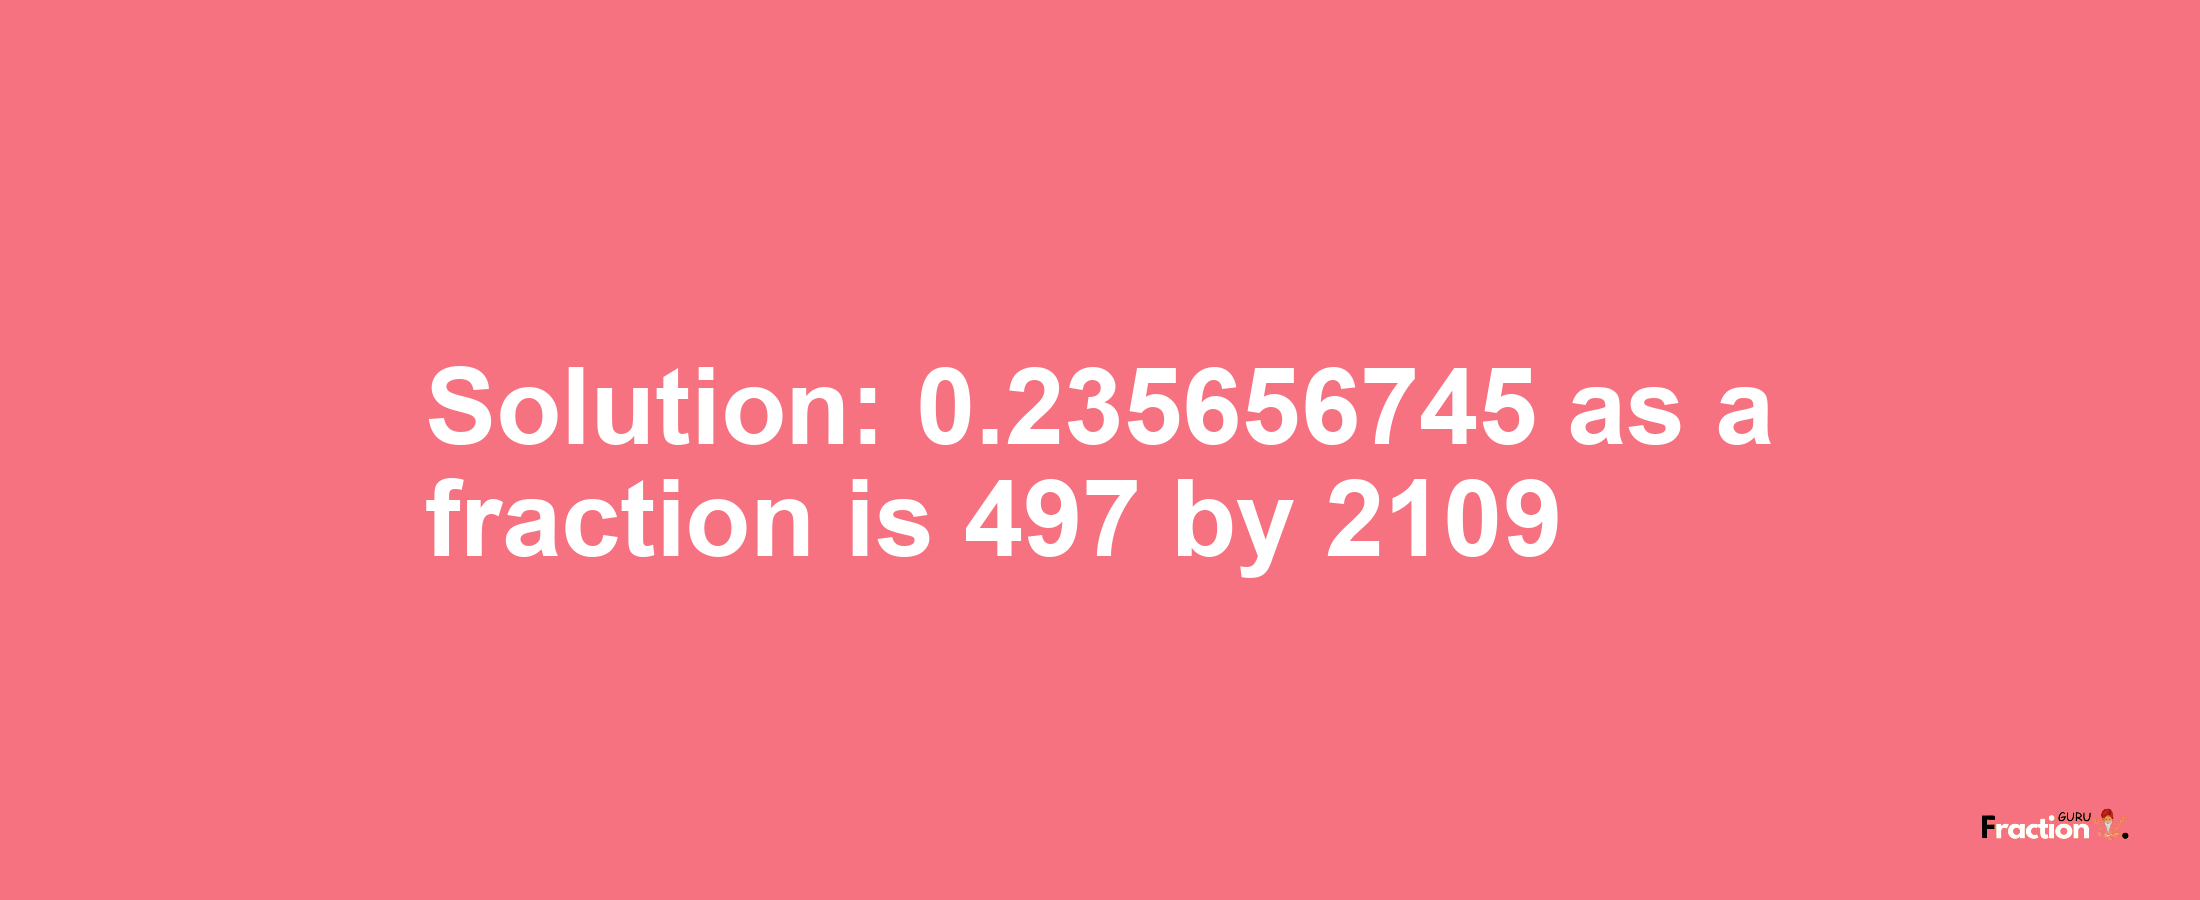 Solution:0.235656745 as a fraction is 497/2109